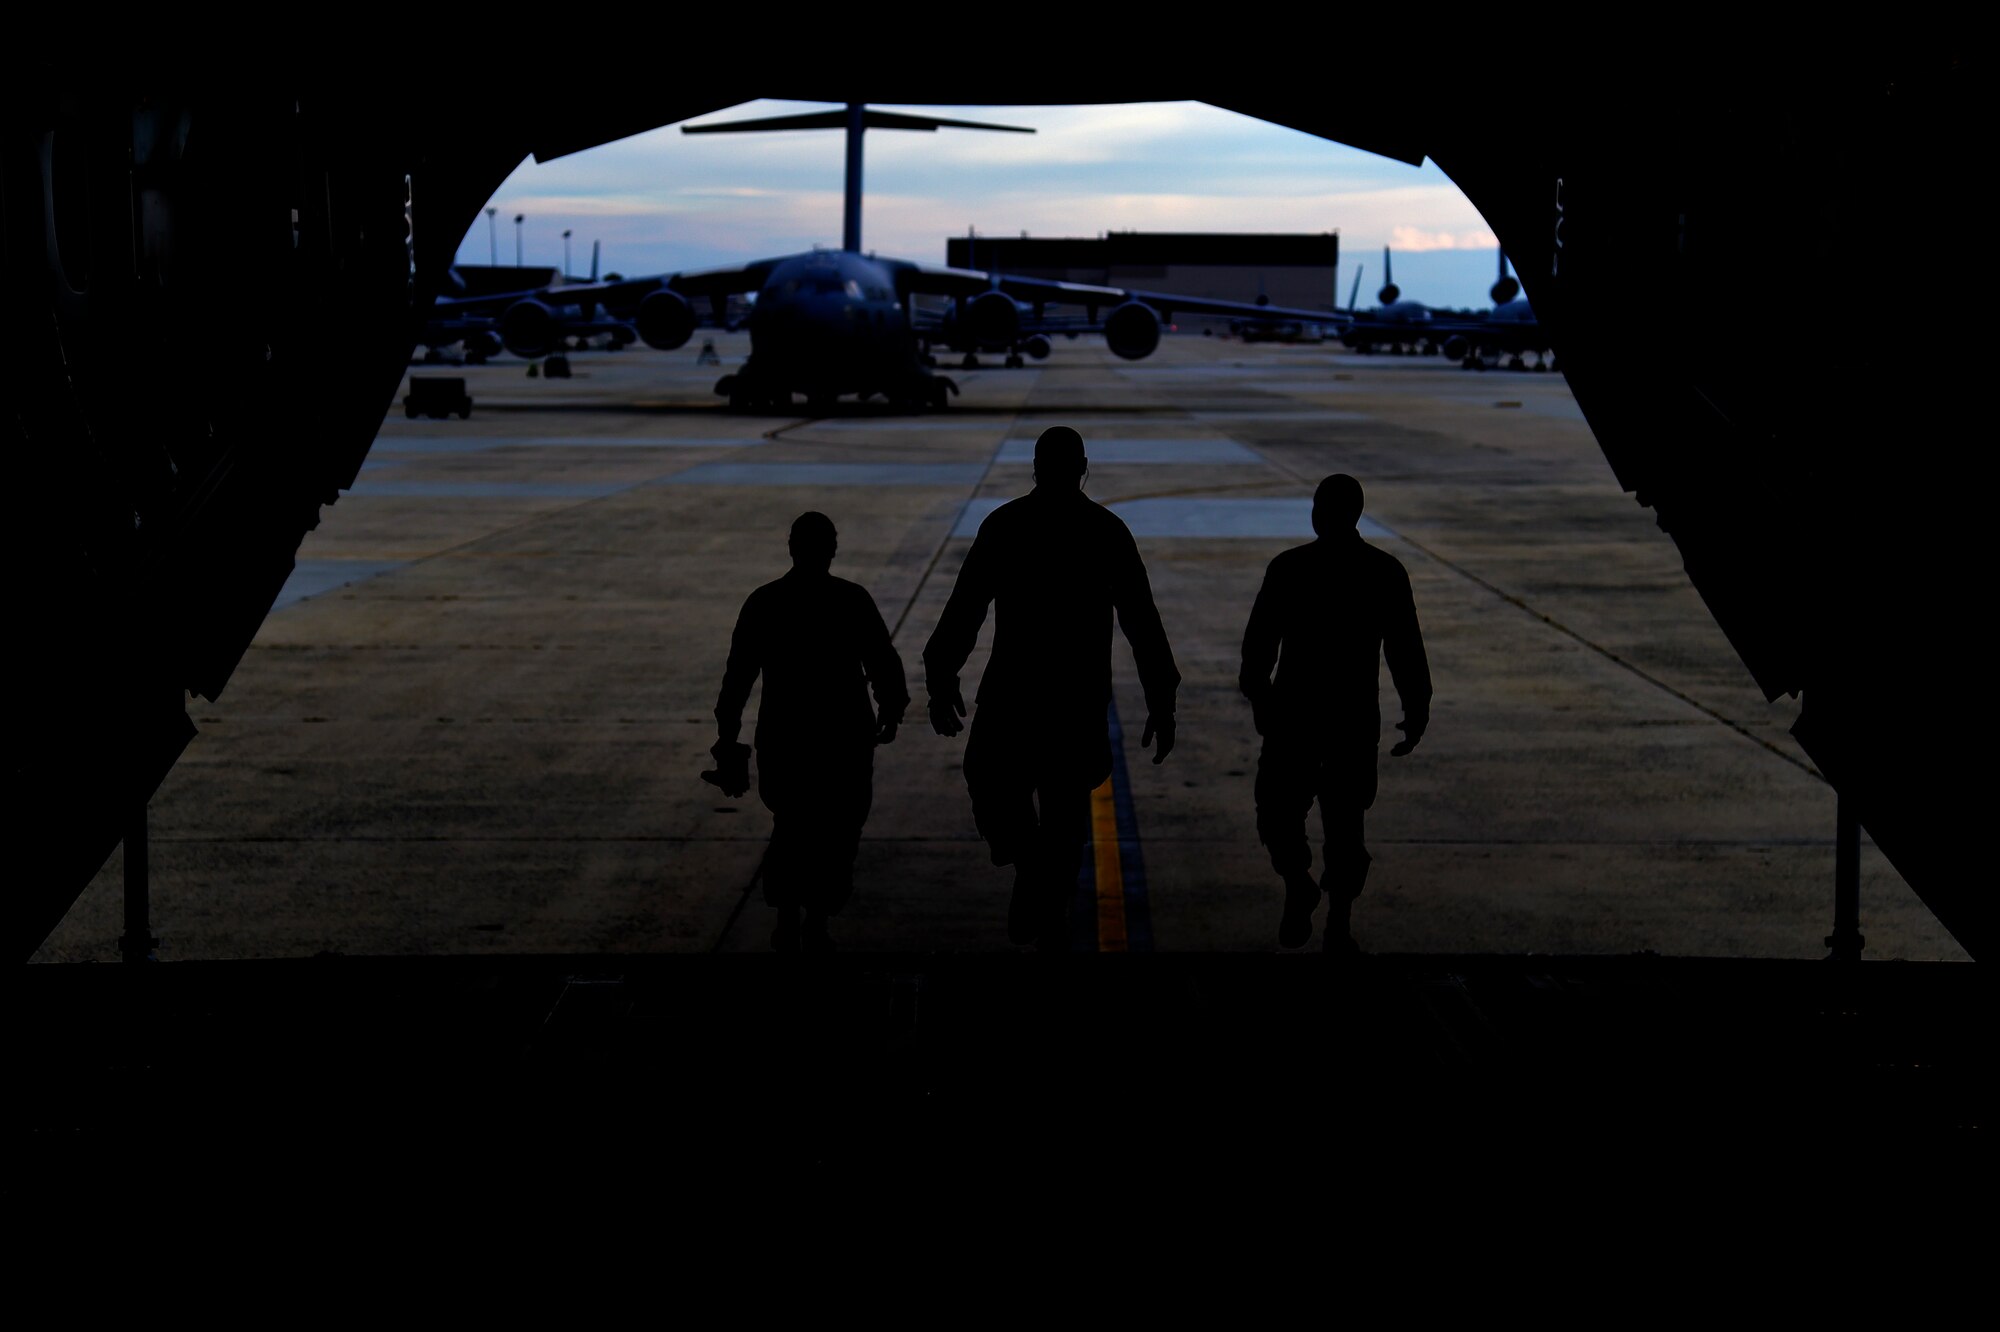 JOINT BASE MCGUIRE-DIX-LAKEHURST, N.J. - Three Airmen from the 621st Contingency Response Wing walk out of a Globemaster III C-17 from Joint Base Charleston, N.C., after loading a Hard-side Expandable Light Air-Mobile Shelter (HELAMS) here, Sept. 29, 2014. The HELAMS will be used by the 621 CRW in West Africa in support of Operation UNITED ASSISTANCE in response to the Ebola virus disease outbreak. The CRW is highly-specialized in training and rapidly deploying personnel to quickly open airfields and establish, expand, sustain, and coordinate air mobility operations. From wartime taskings to disaster relief, the CRW extends Air Mobility Command's reach in deploying people and equipment around the globe. (U.S. Air Force photo by Staff Sgt. Gustavo Gonzalez/Released)